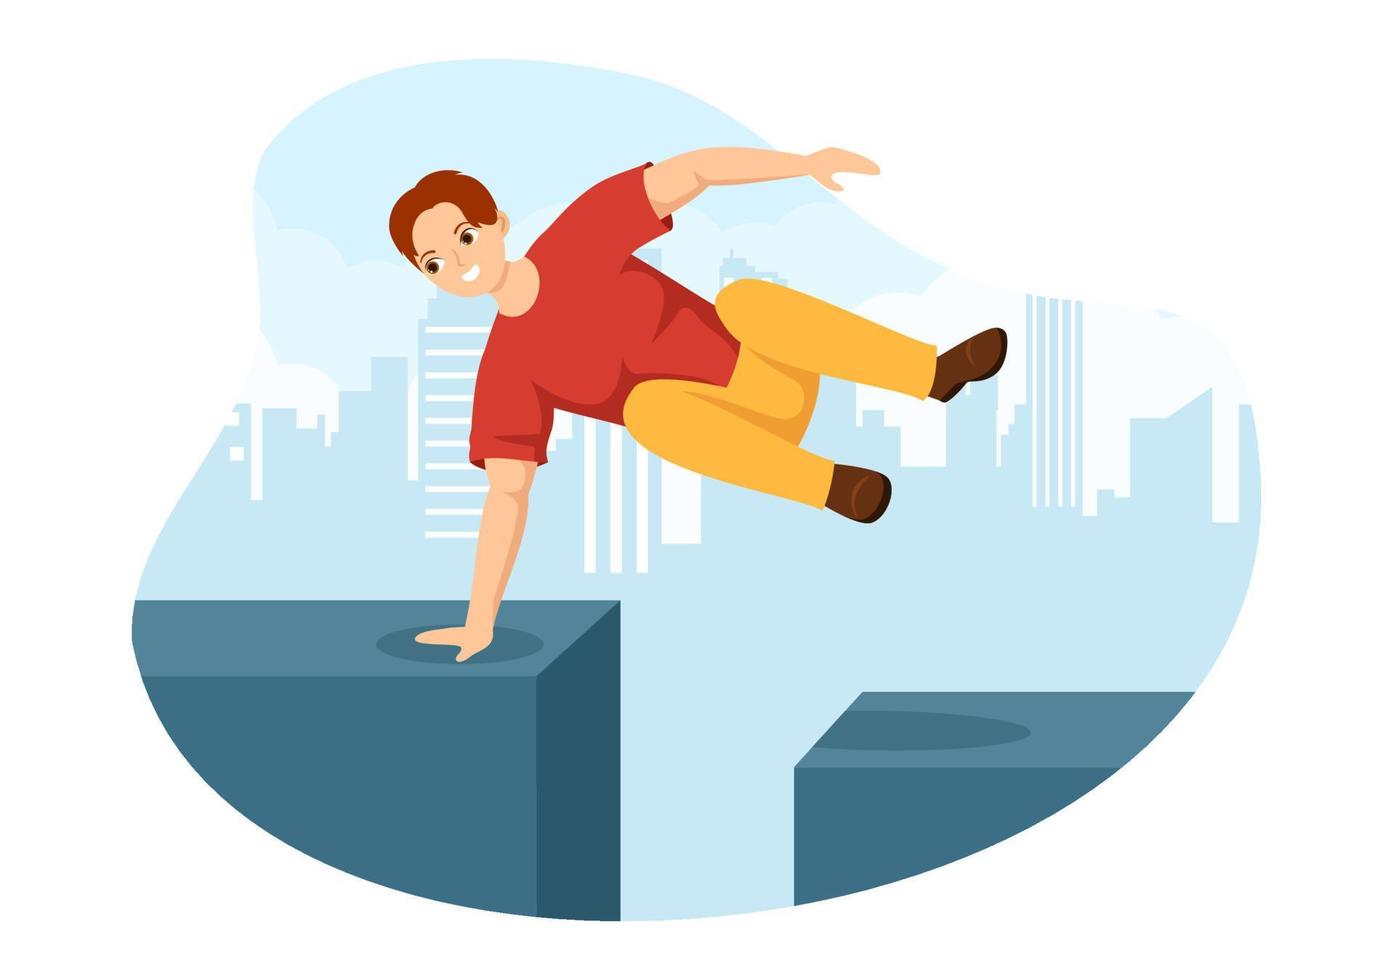 Parkour Sports with Young Men Jumping Over Walls and Barriers in City Streets and Buildings in Flat Cartoon Hand Drawn Template Illustration vector